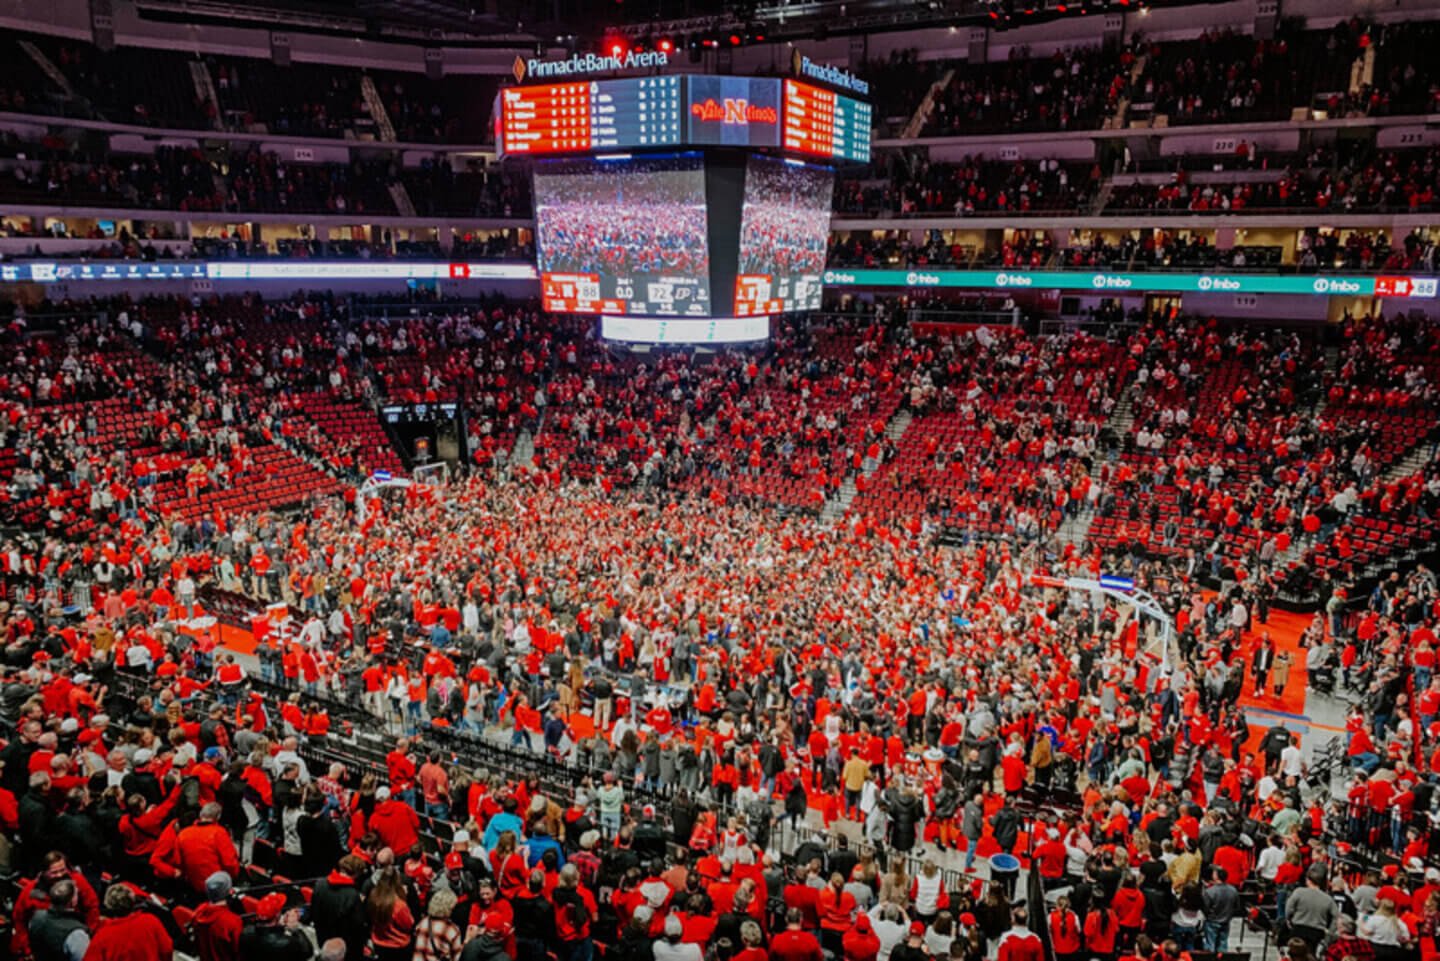 Husker fans rush the court after an epic win in basketball.